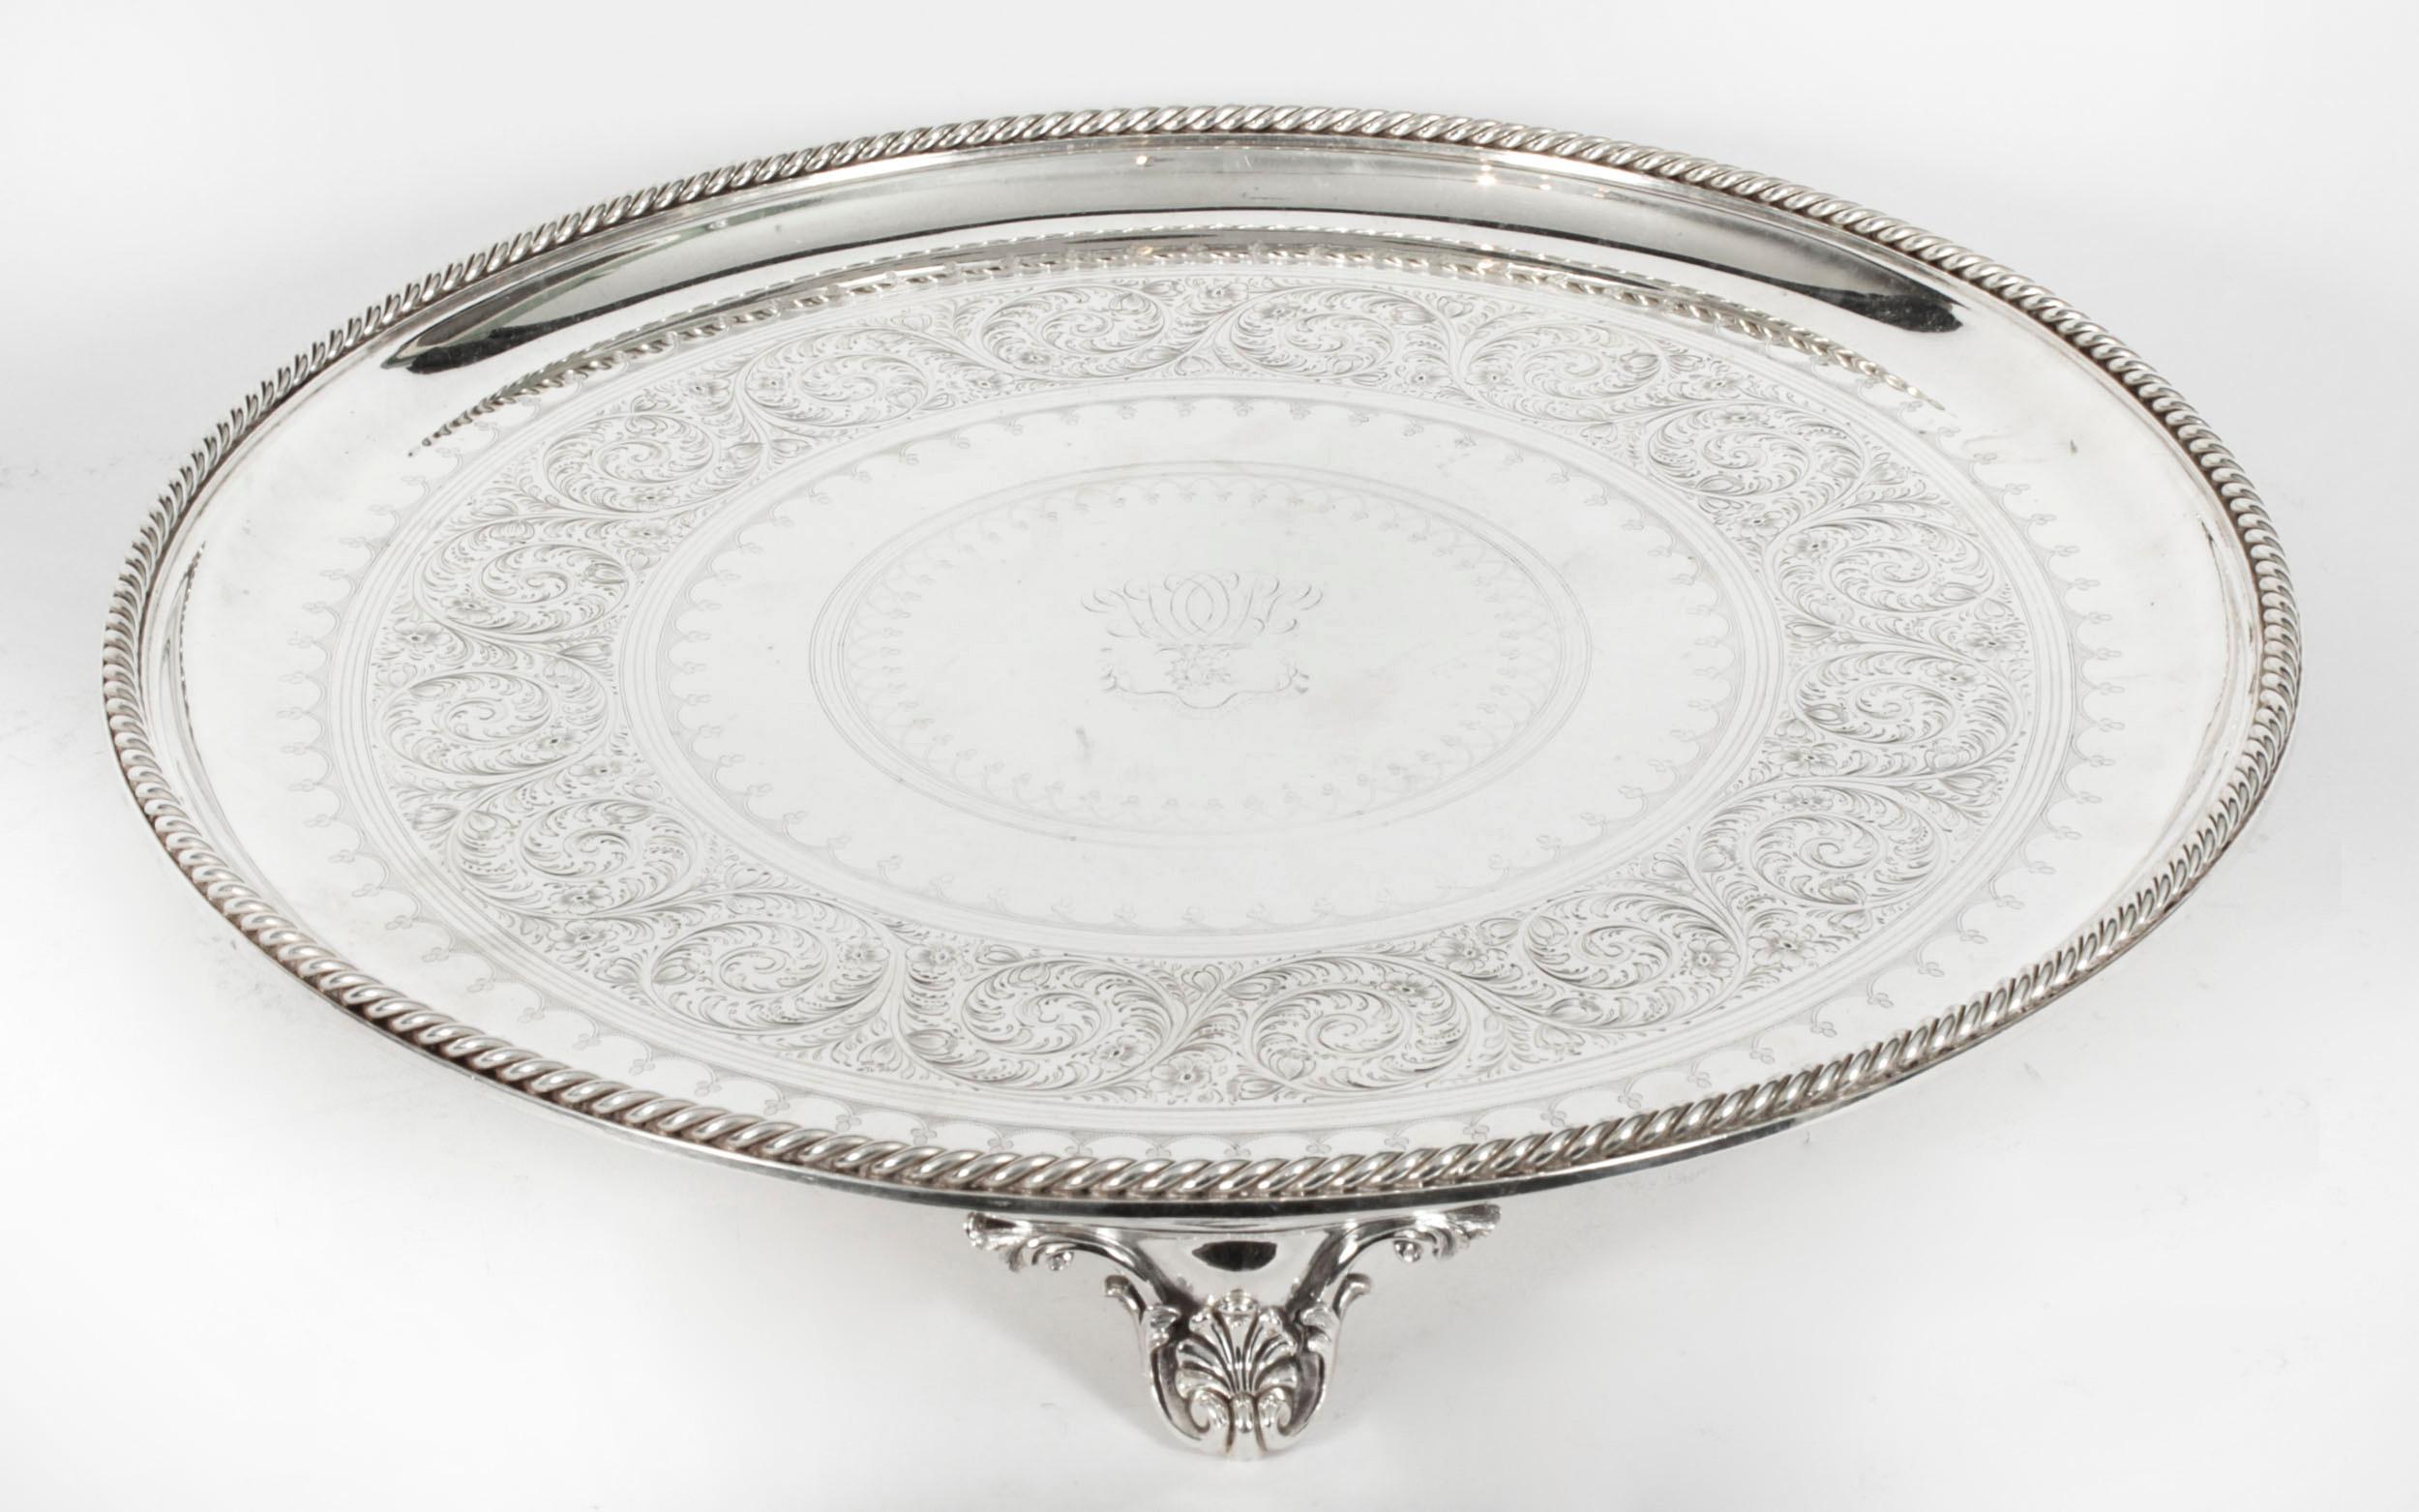 This is a large wonderful antique silver plated Victorian salver bearing the makers marks for the renowned silversmith Elkingon and the date mark for 1888.
 
It has beautiful embossed and engraved floral and foliate decoration in the Neo-classical